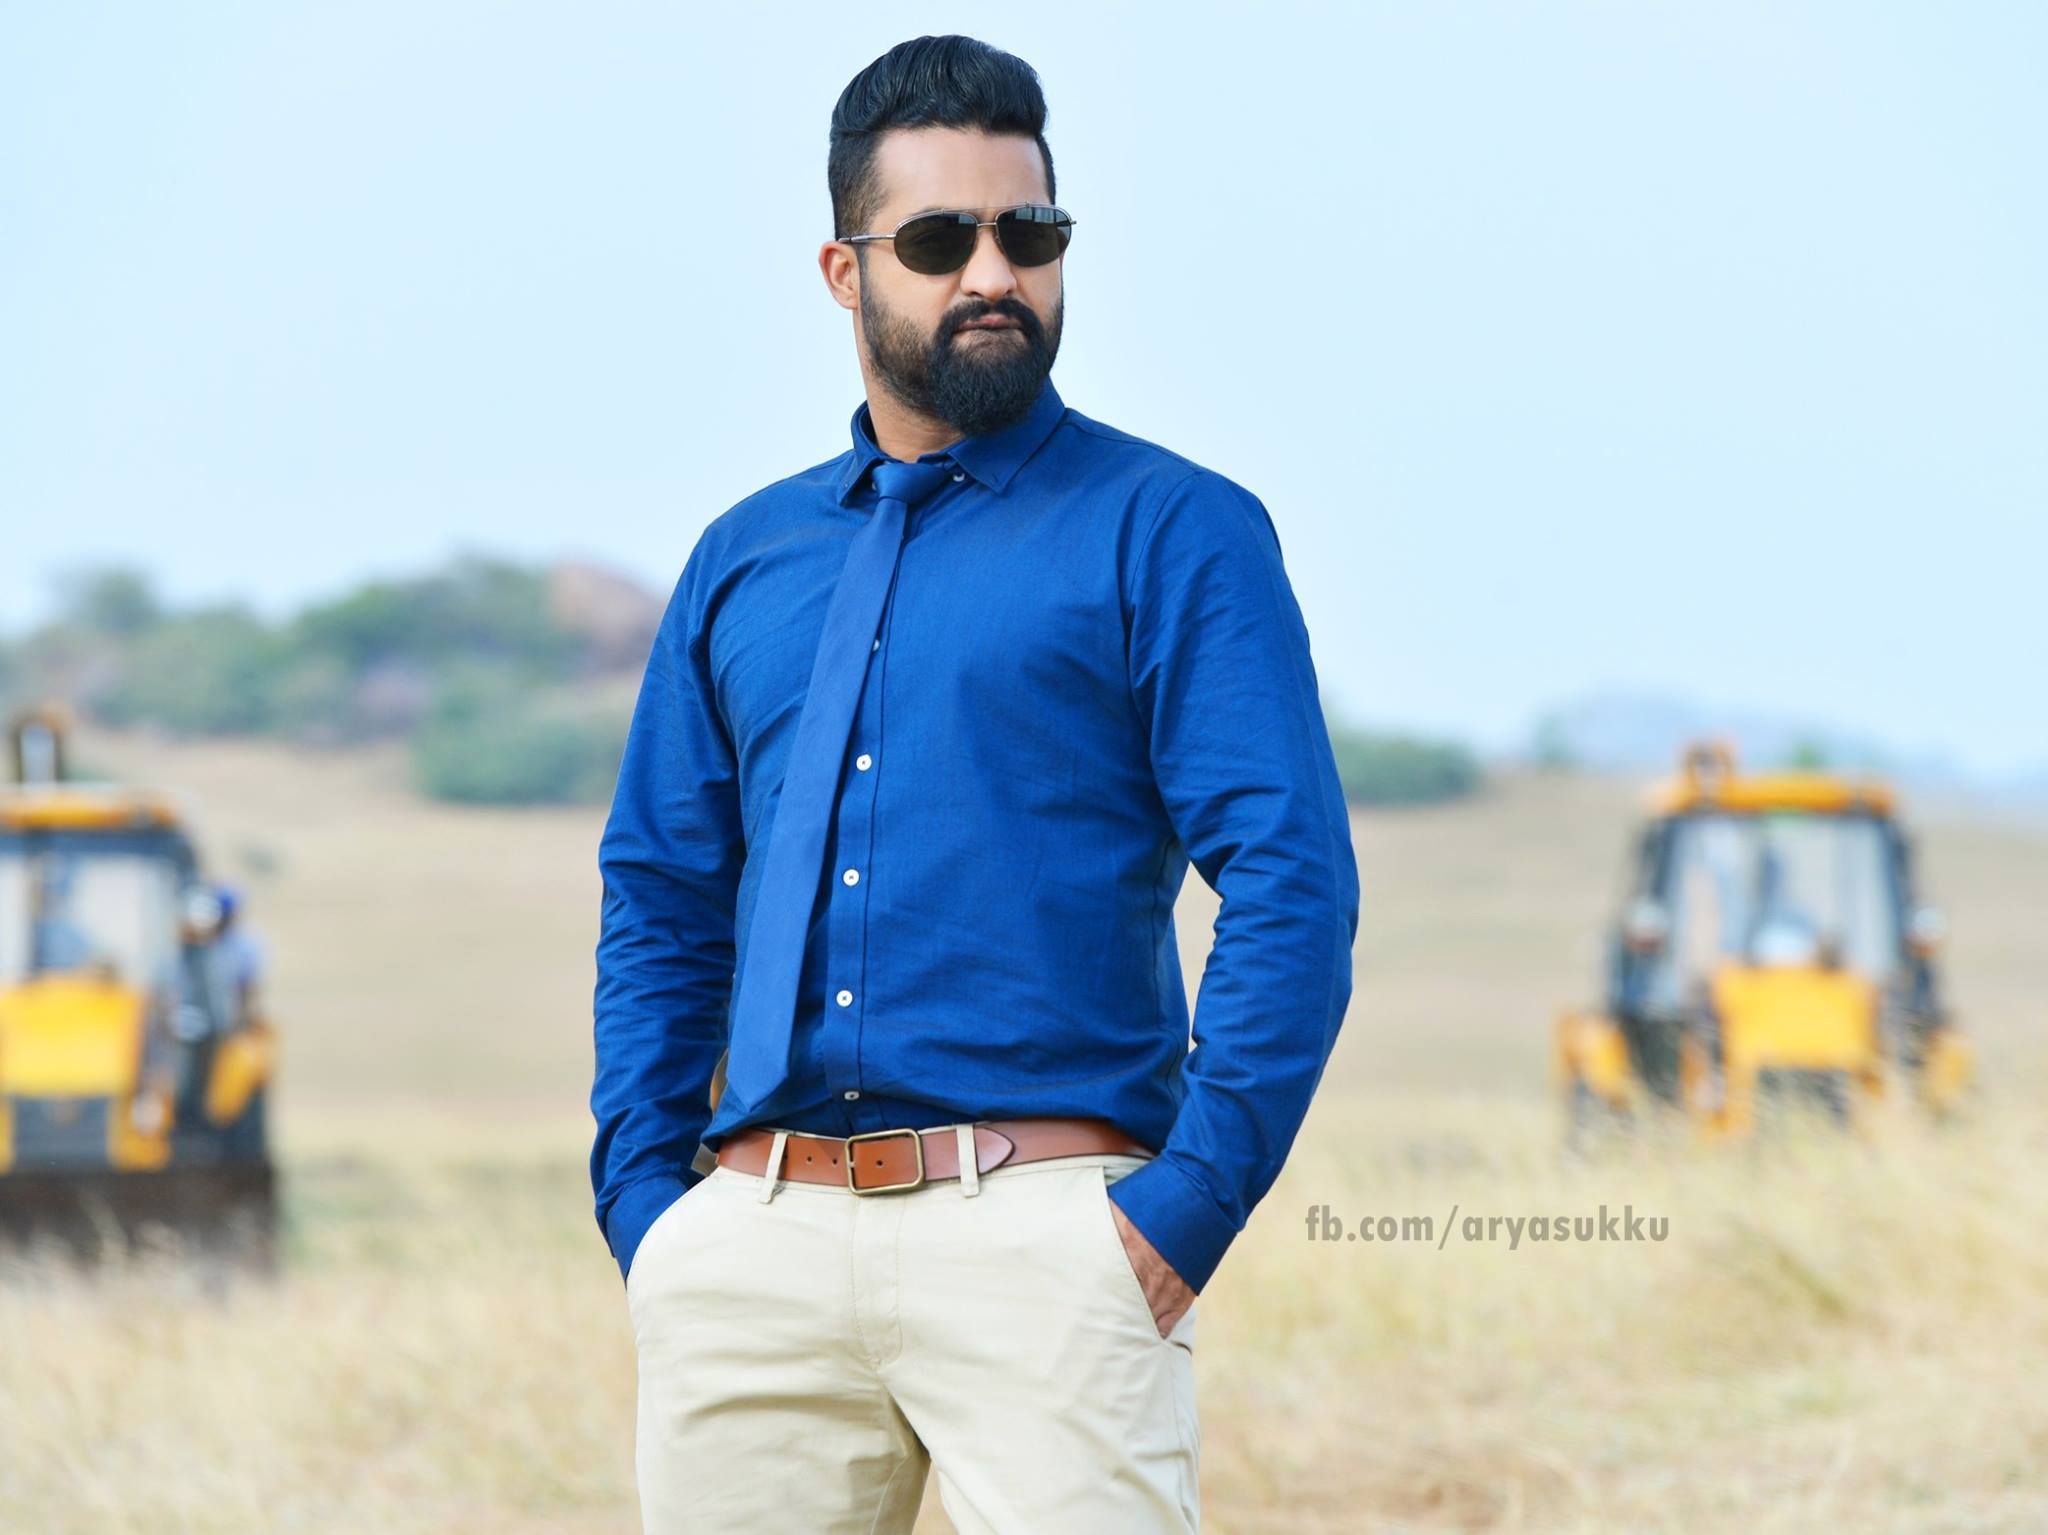 About JrNTR HD Wallpapers Google Play version   Apptopia